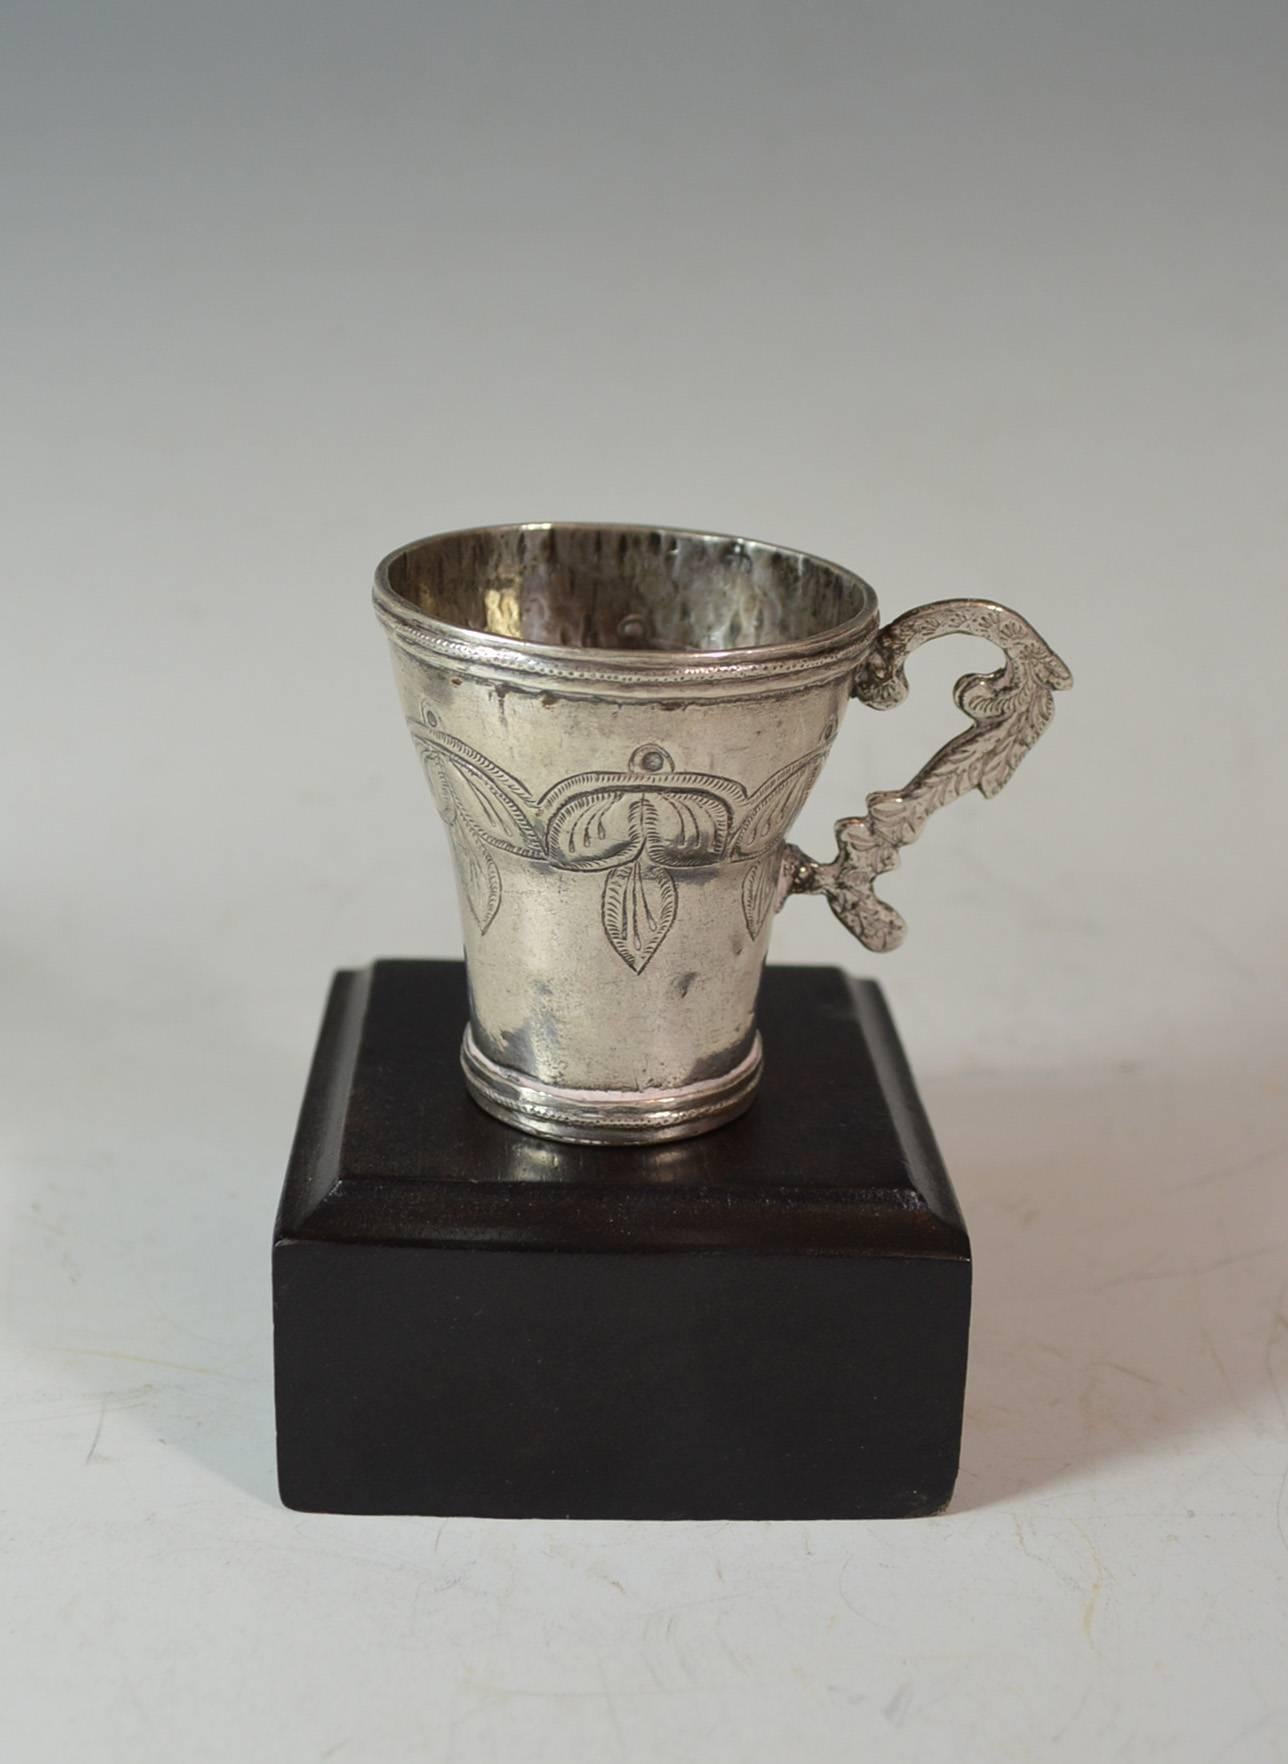 Bolivian Antique Andean Colonial Silver Cup and Spoon Tupu, 19th Century, Bolivia